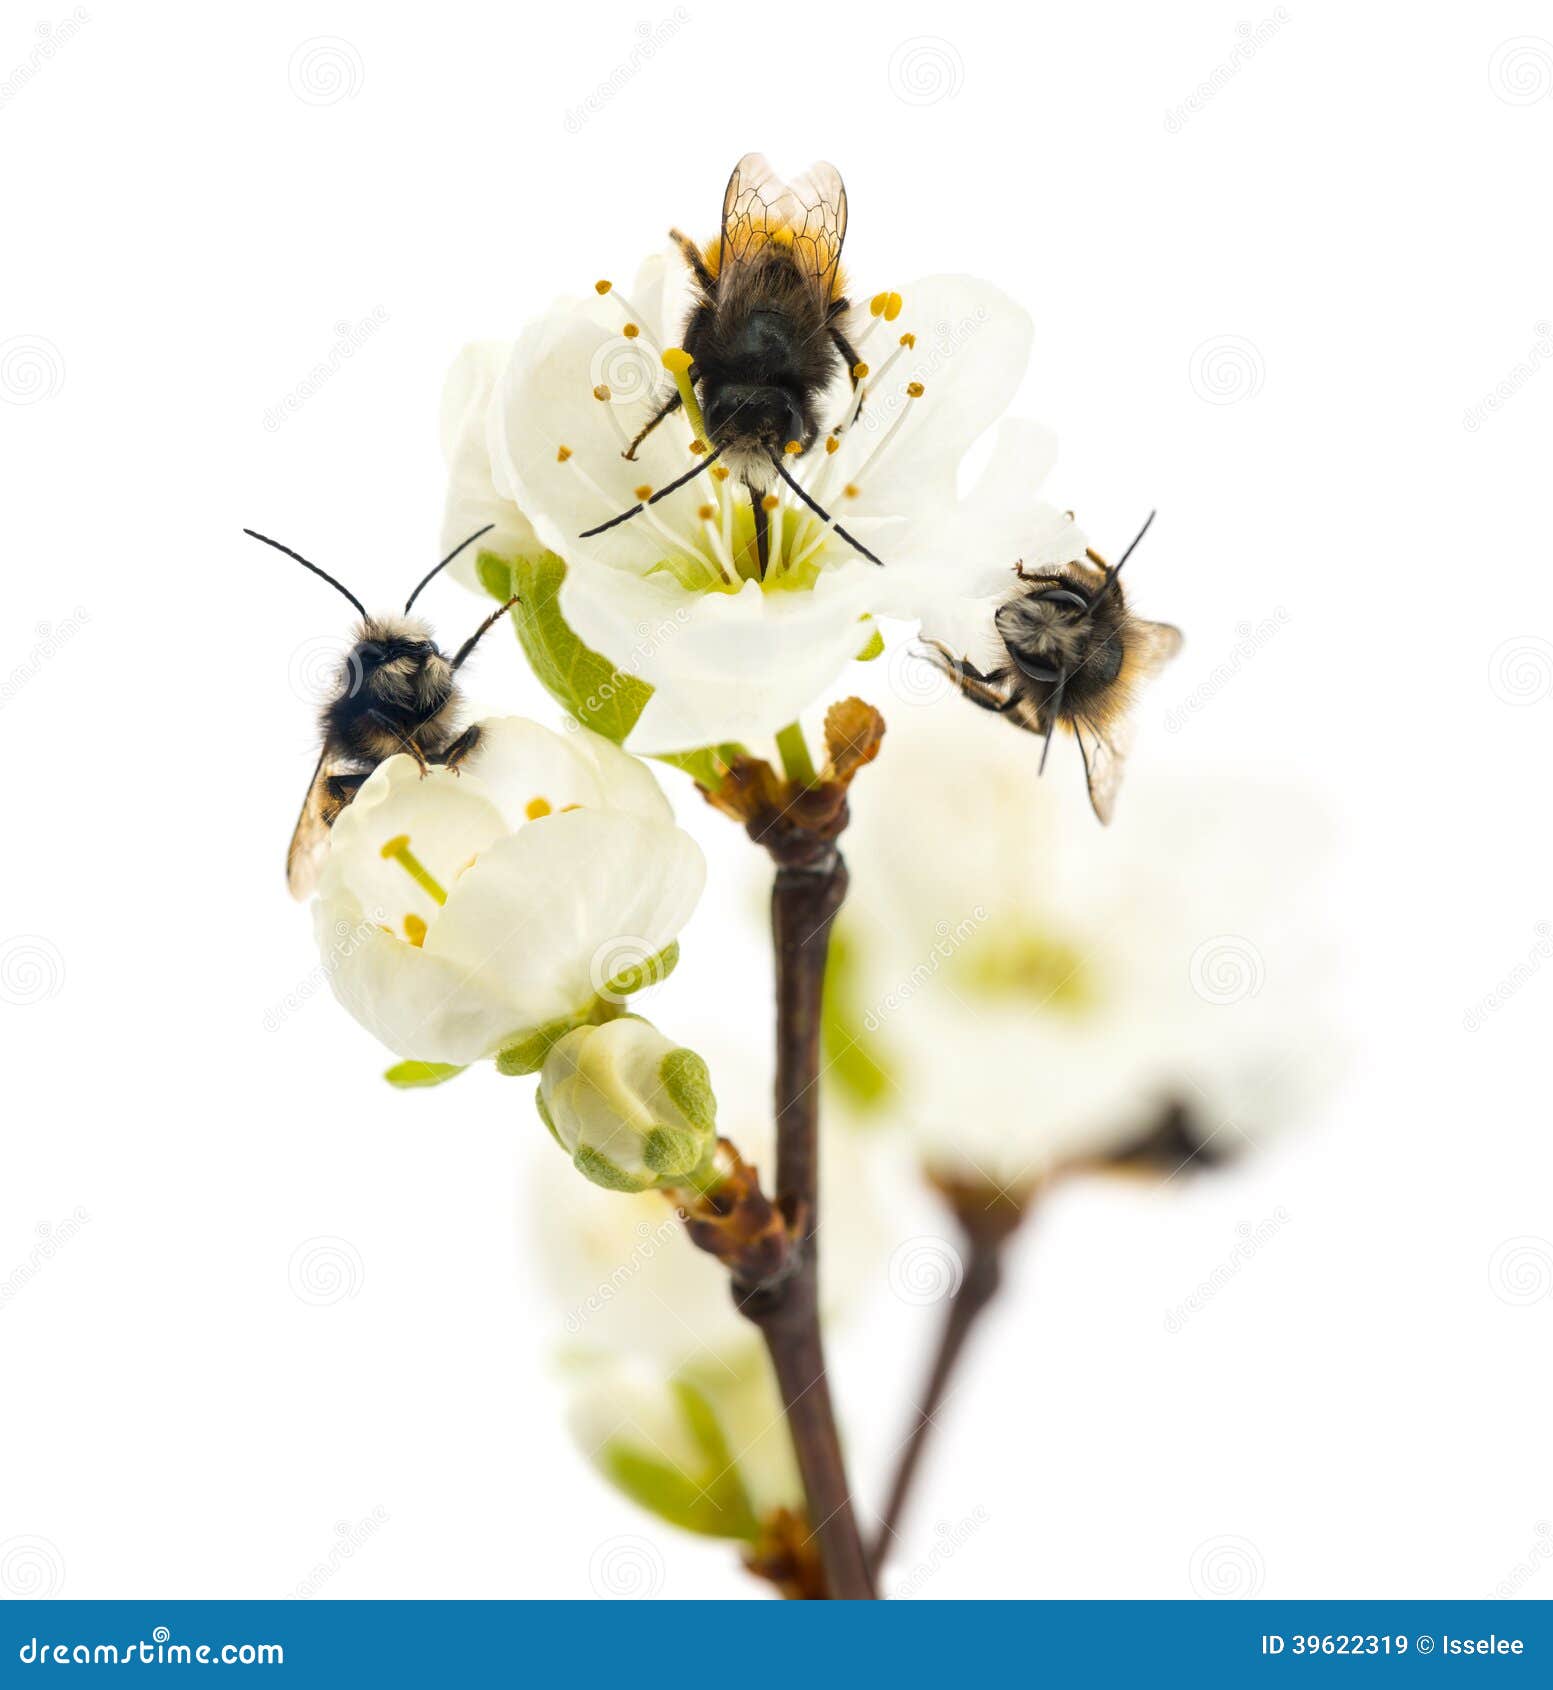 group of bees pollinating a flower - apis mellifera,  on